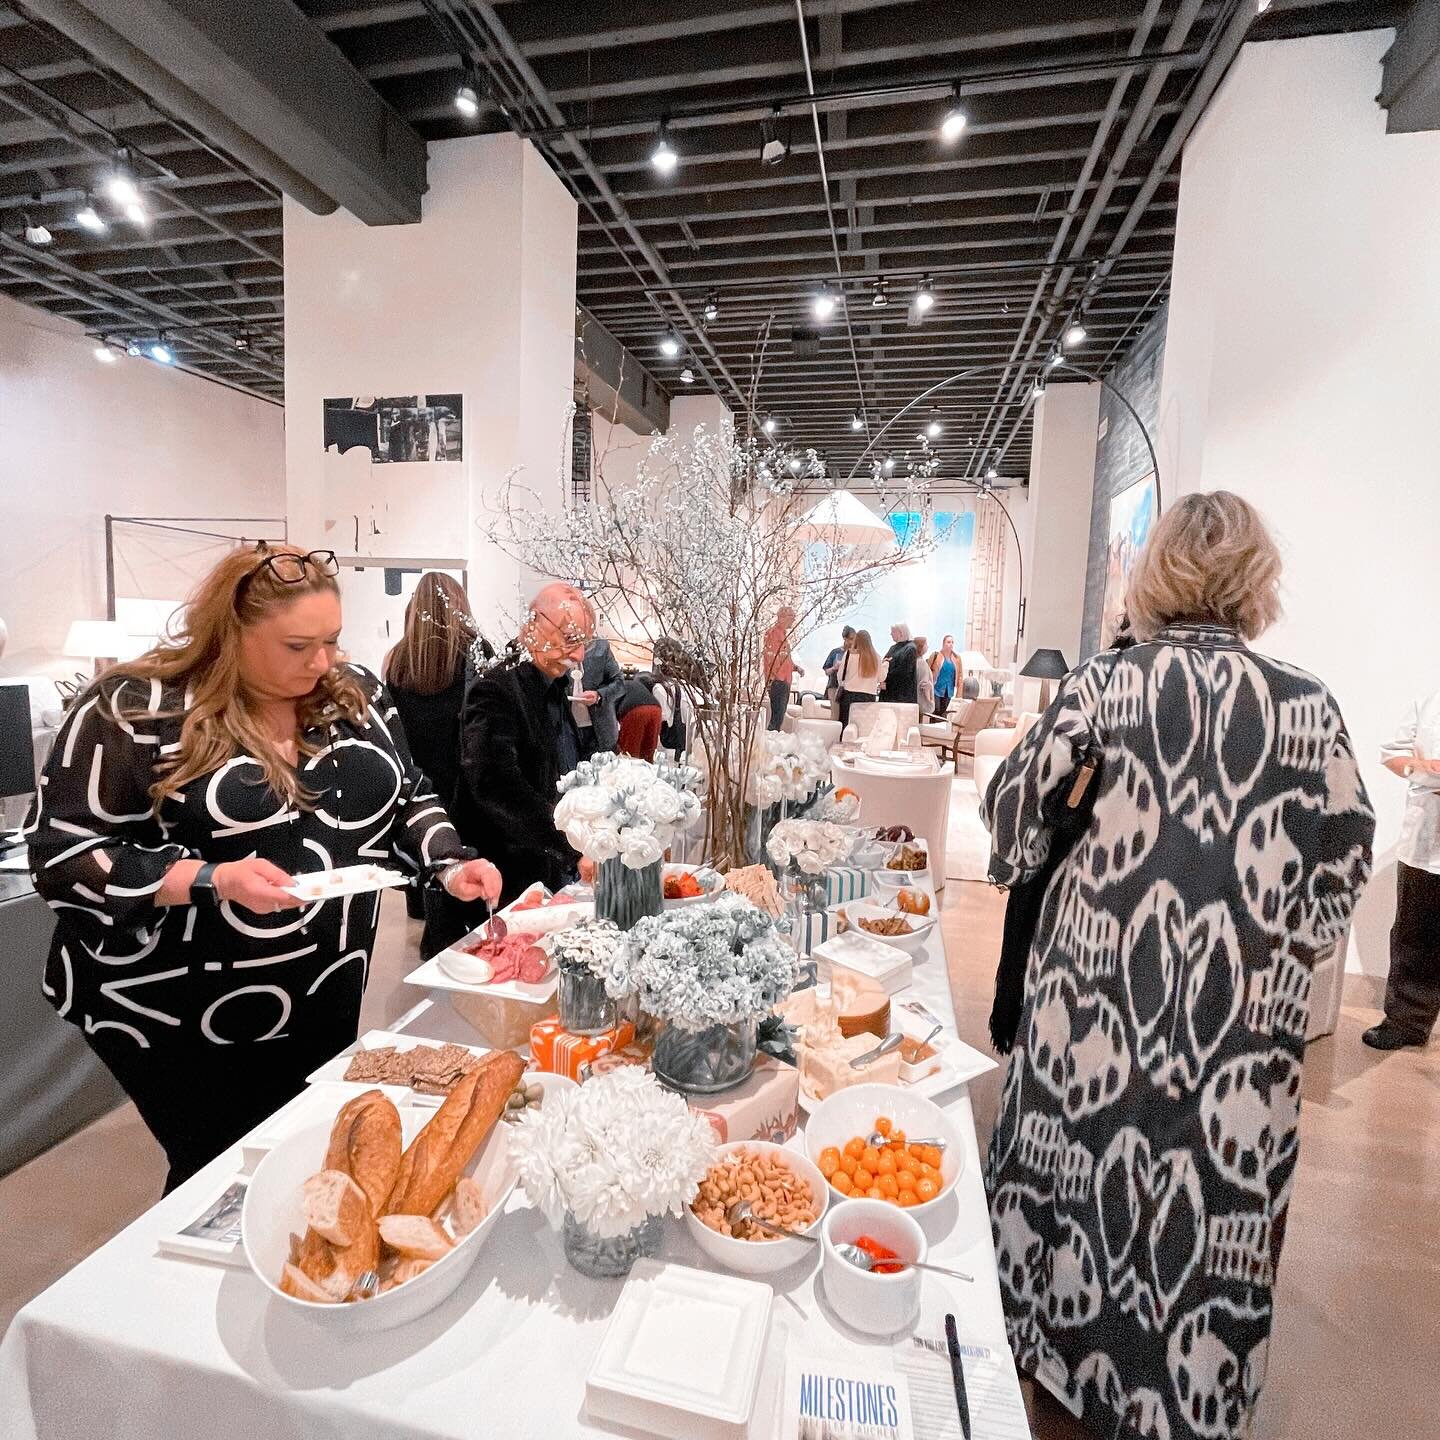 It was a fun night at the Kneedler Fauchere showroom. Food, drinks, and many wonderful people to meet. A big thank you to the amazing staffs who made this event so memorable.